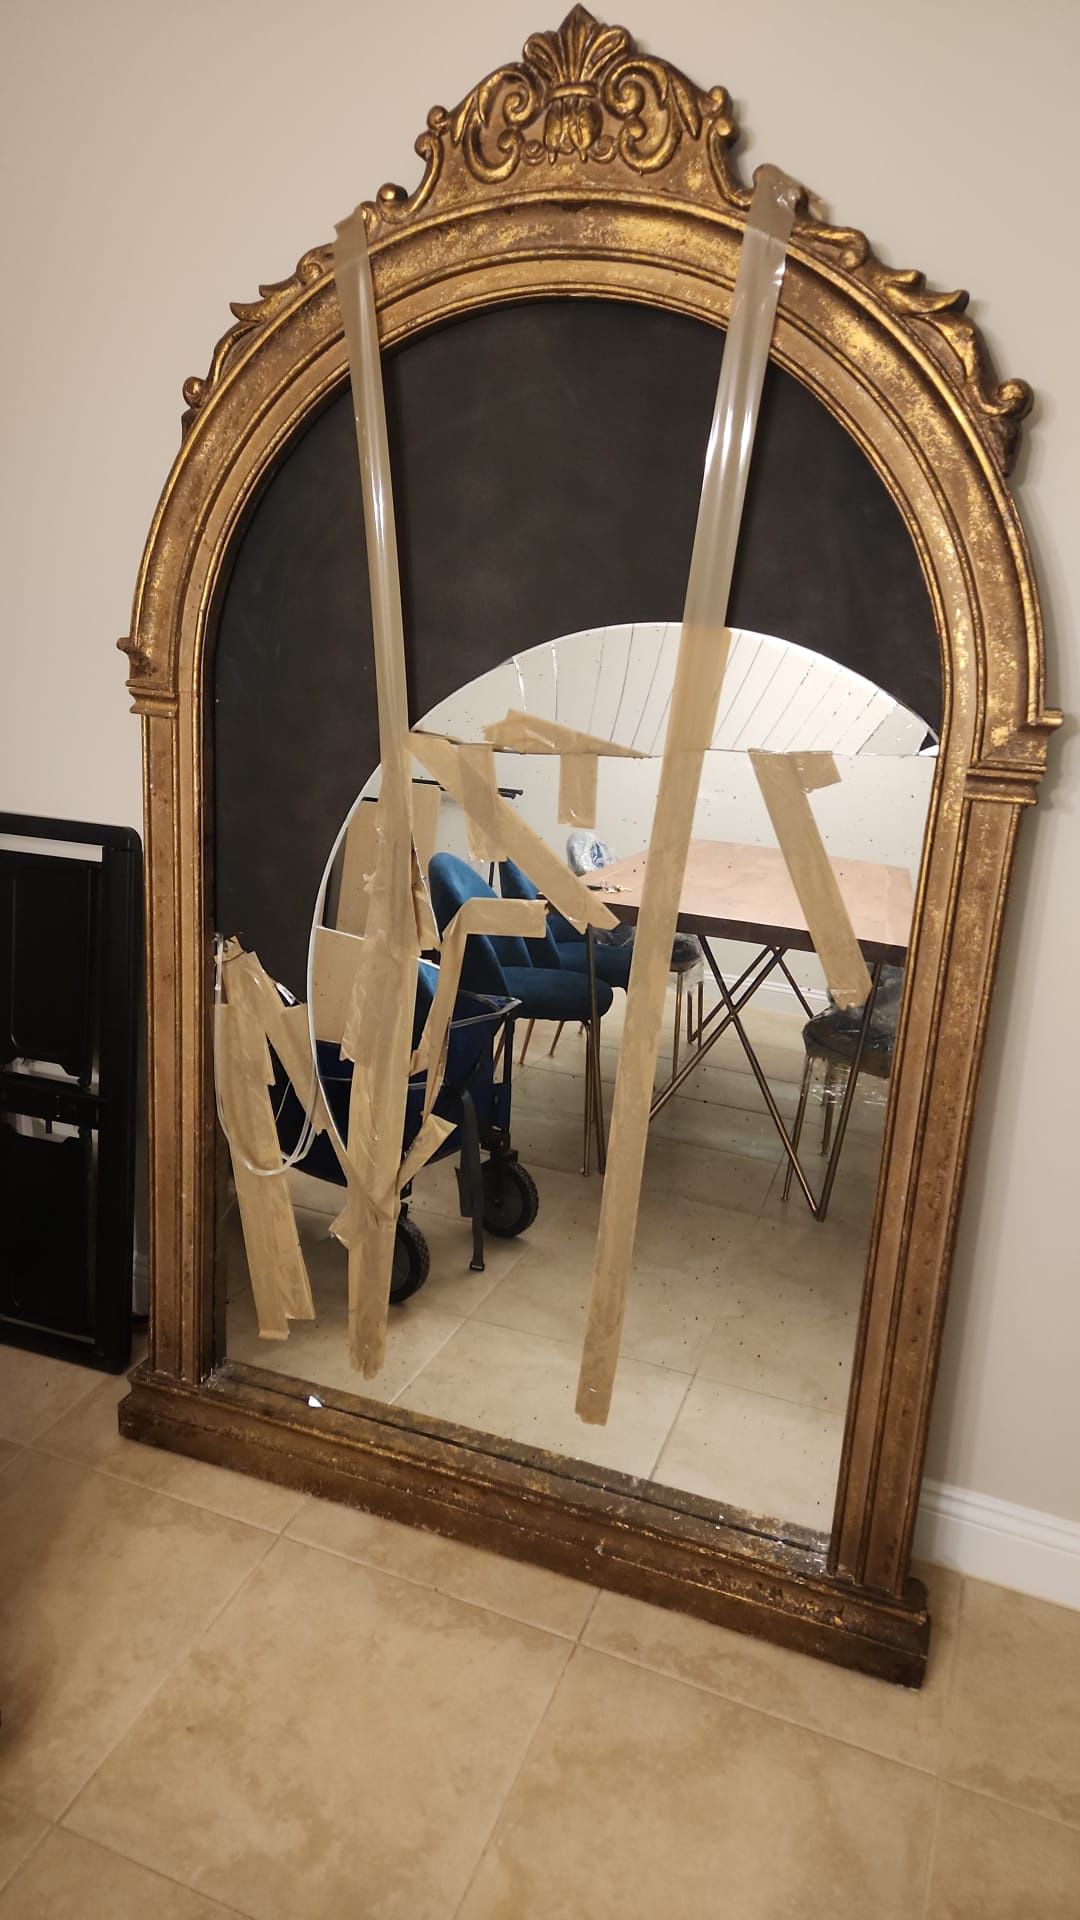 Antique Large French Mirror Frame 75” x 45”